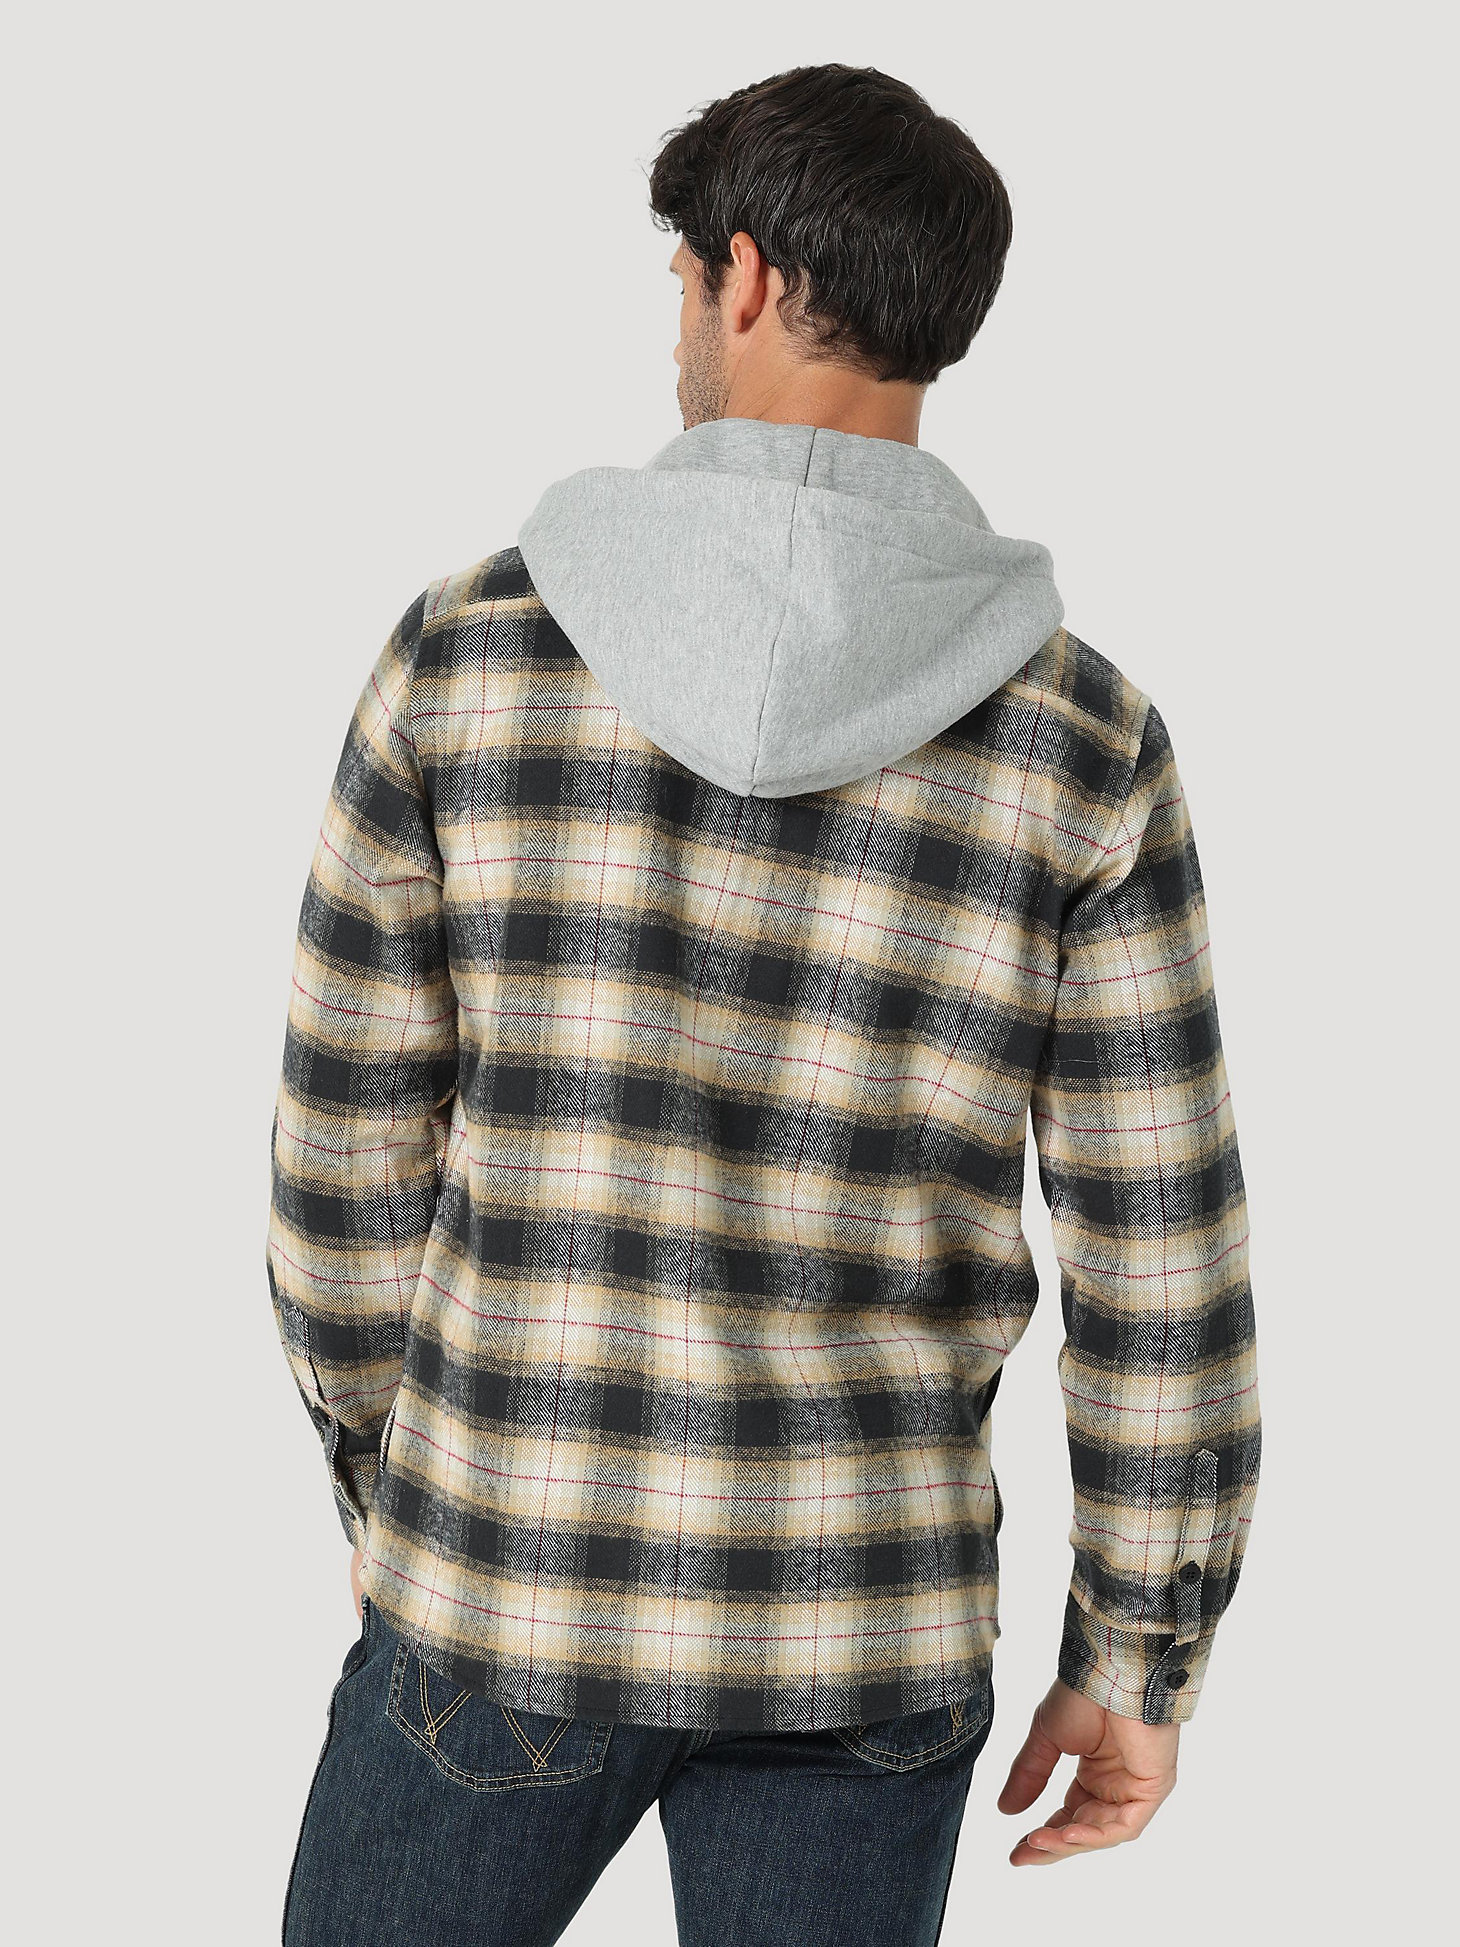 Men's Plaid Flannel Hooded Shacket in Sea Grass alternative view 1